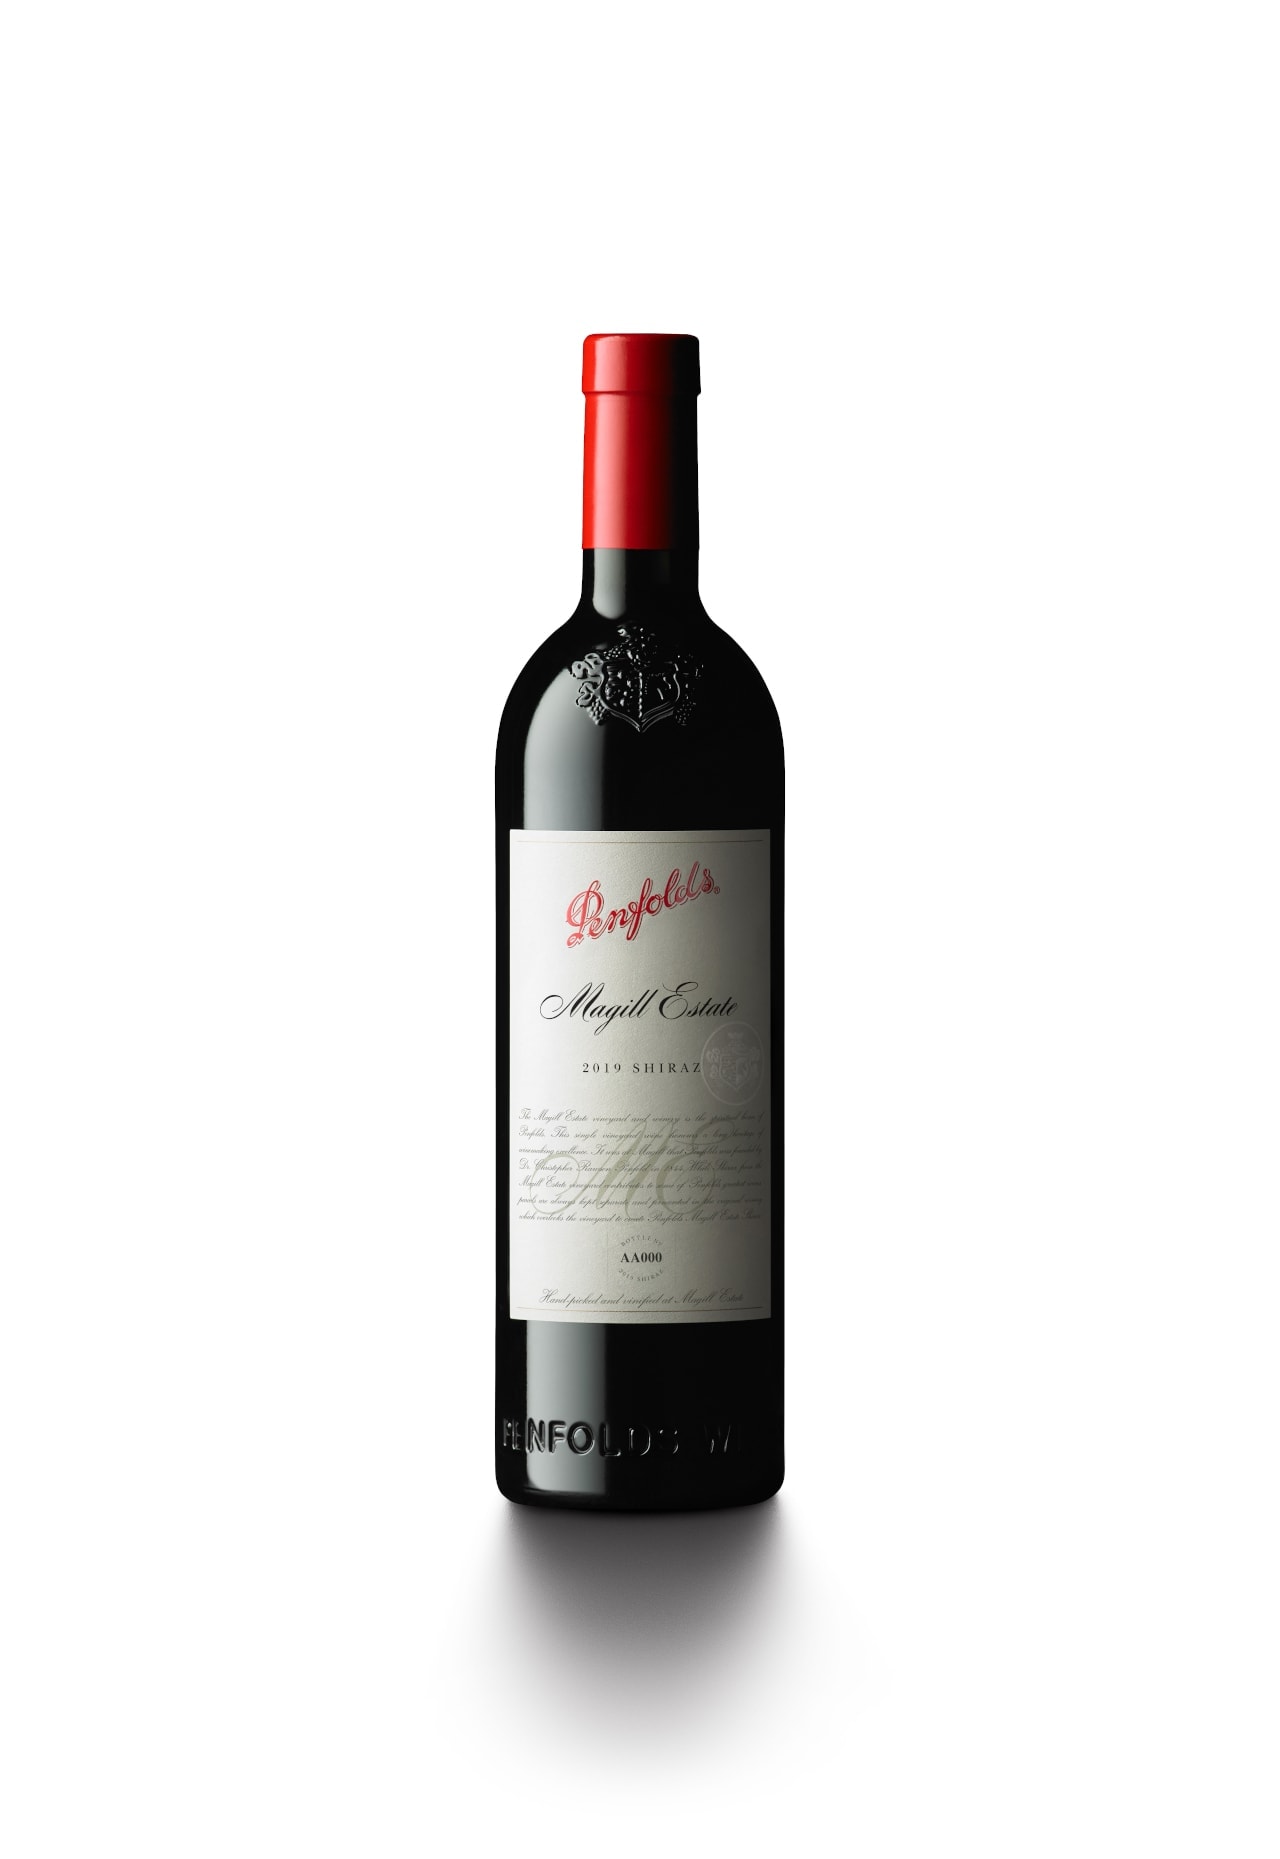 Penfolds Magill Estate Shiraz 2019 Cork 150 22Elegant Medium Weight Style With Velvety Texture And Fine Tannins Matured In Both French And American Oak. It Is A Sleek Contemporary Wine.22